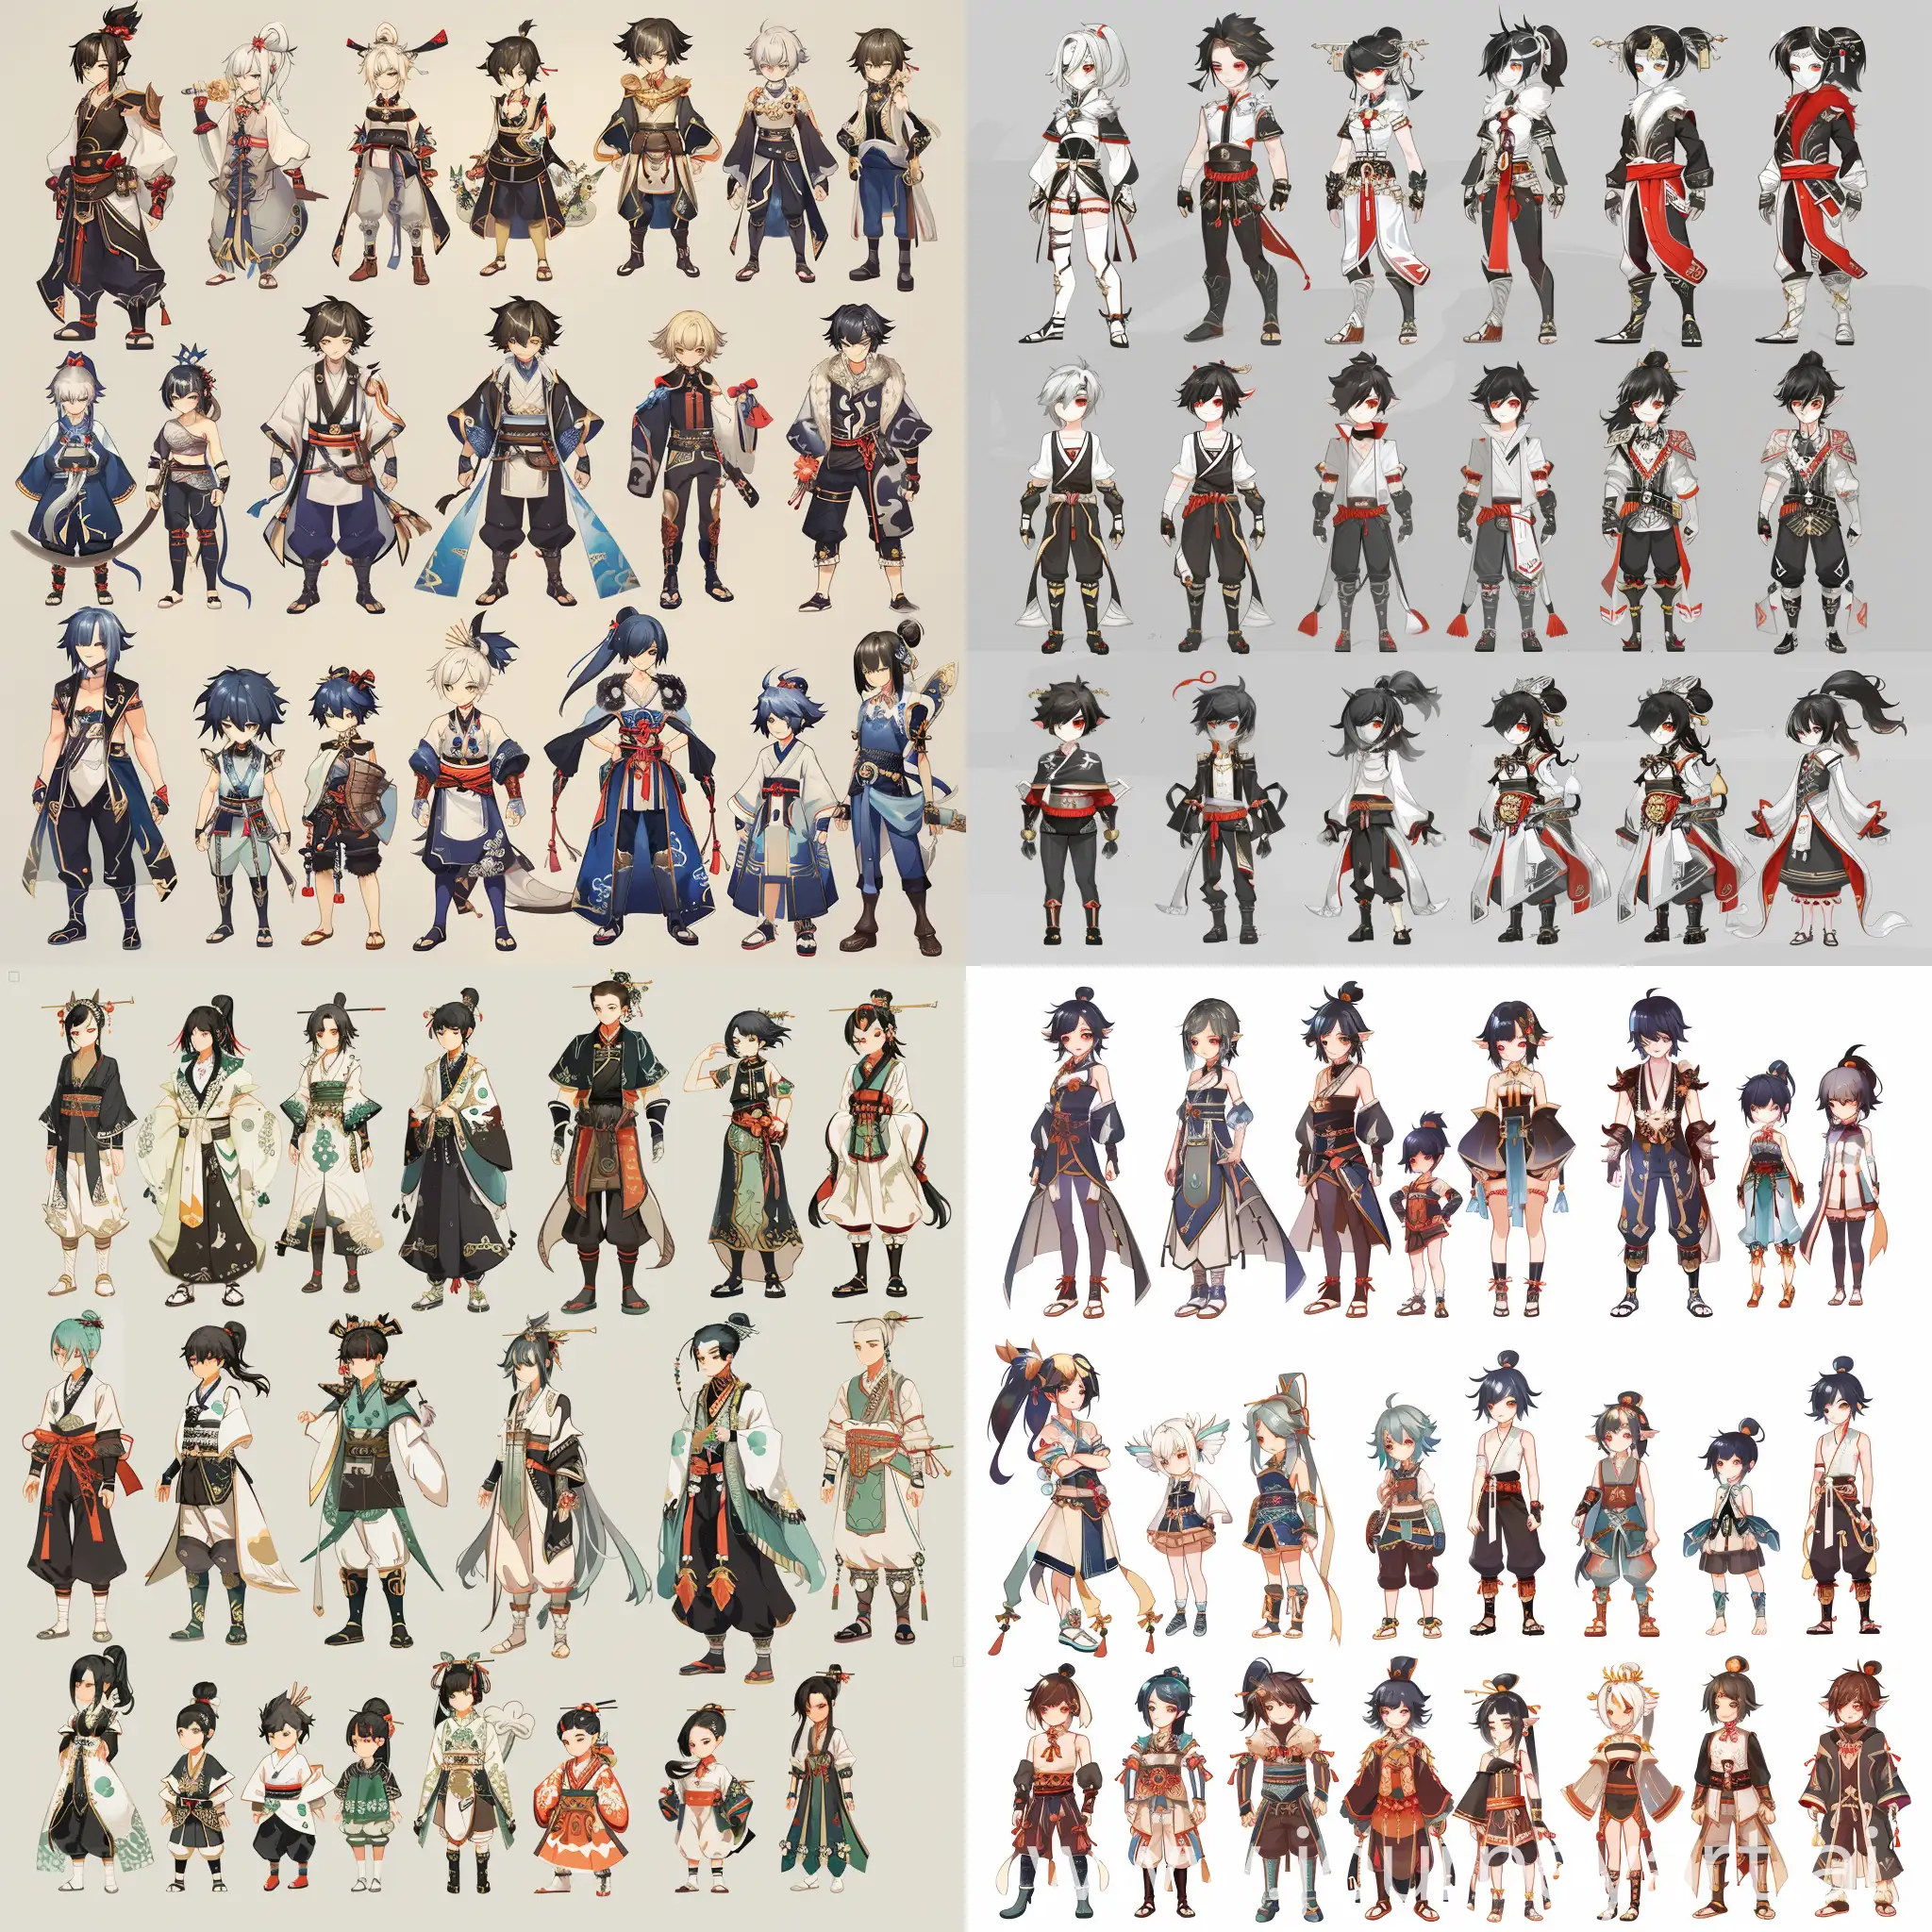 genshin impact original character sheets, multiple, full body. cantonese culture. creative, different from each other. male and female characters, children and teens and adults. 